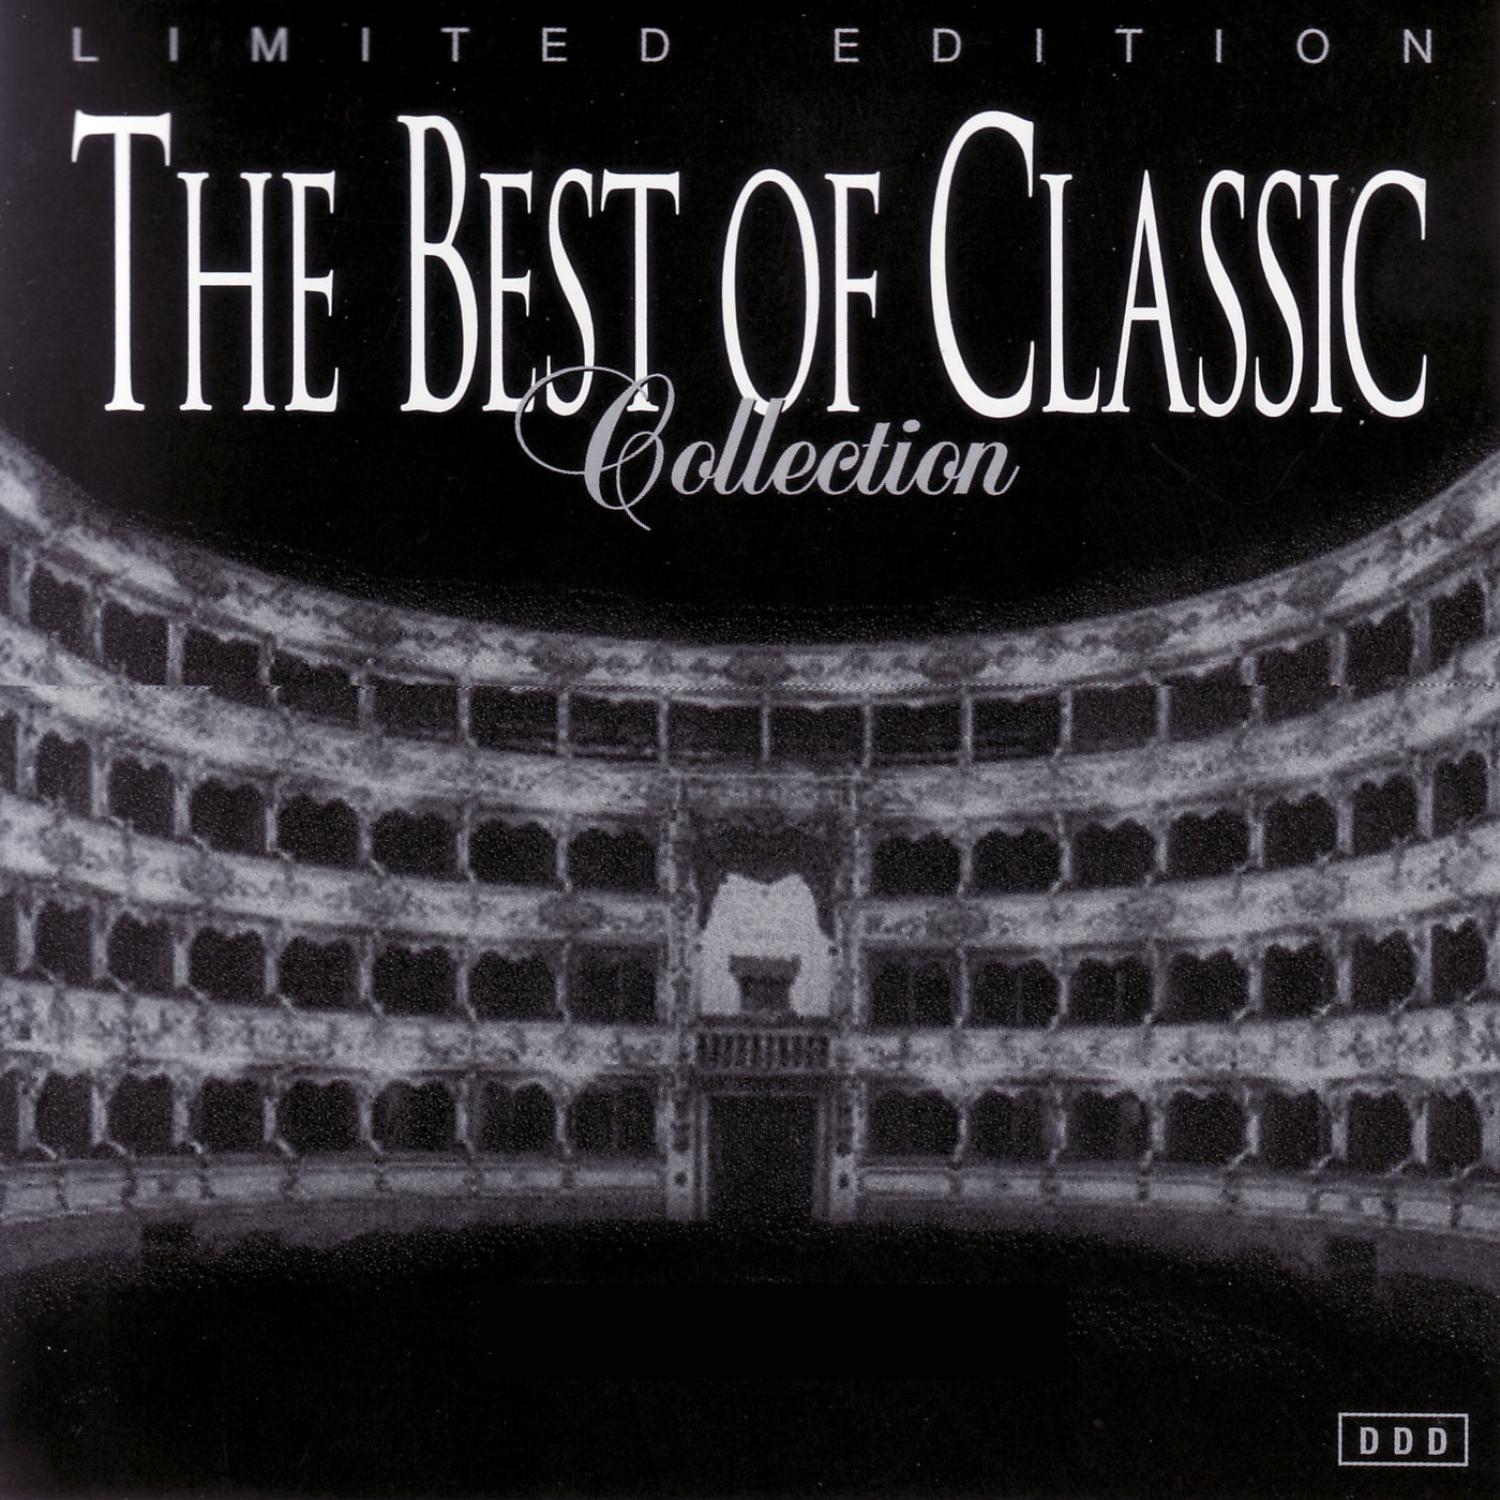 The Best of Classic Collection